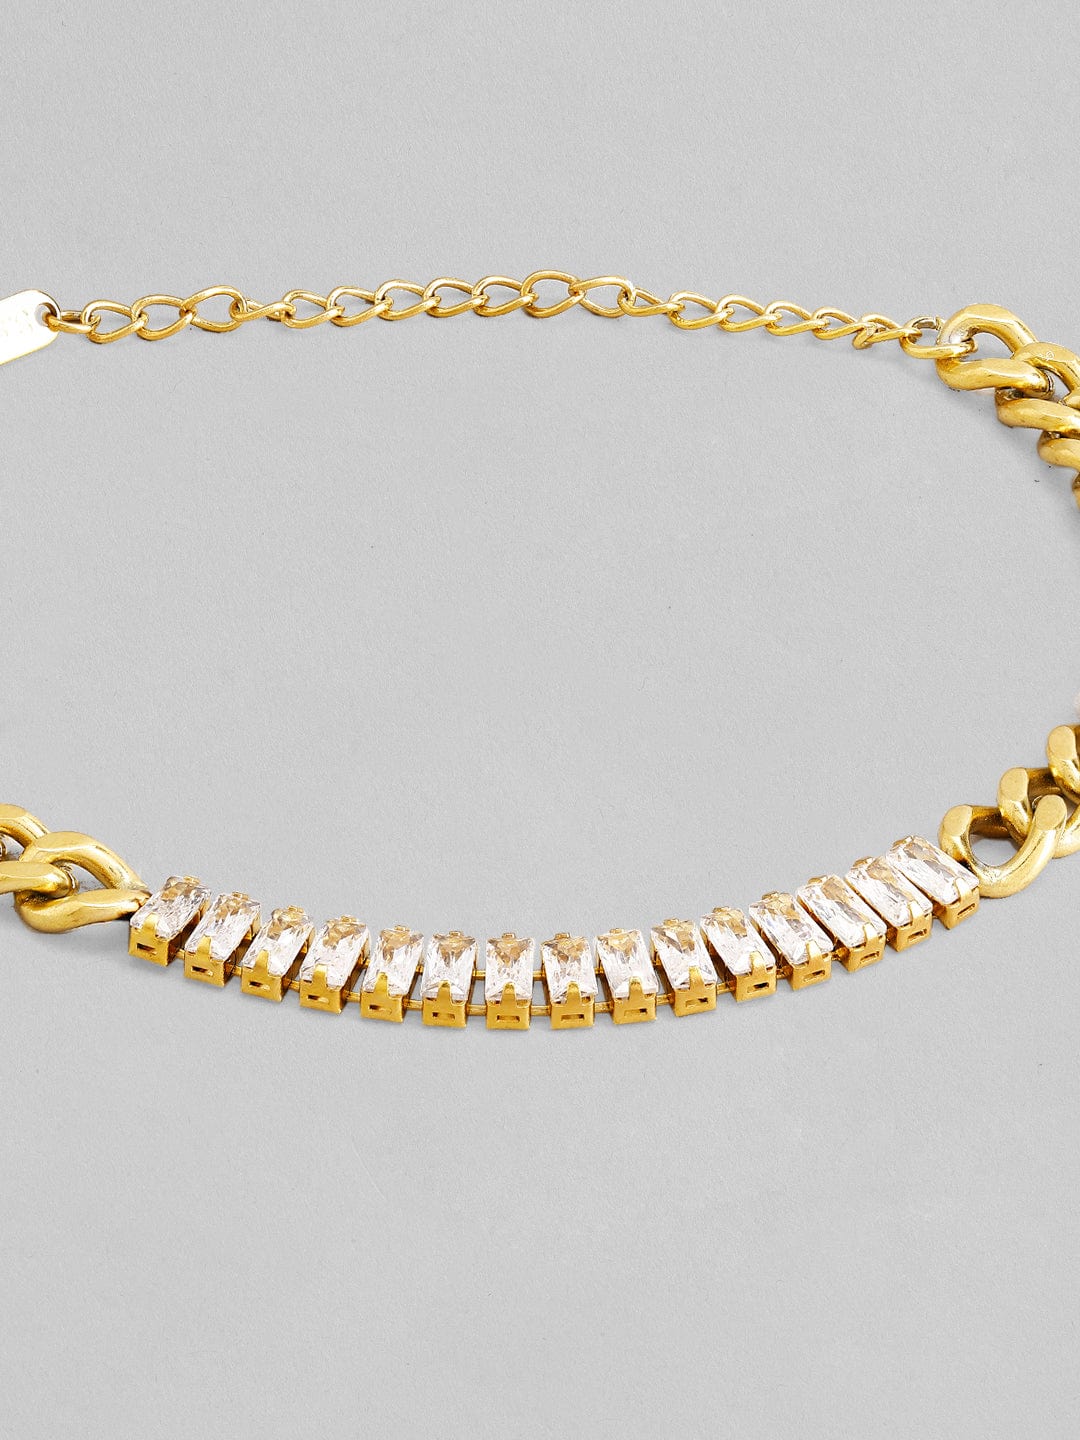 Rubans Voguish 18K Gold Plated Stainless Steel Waterproof Cuban Chain Bracelet With Zircon Baguettes Studded. Bangles & Bracelets